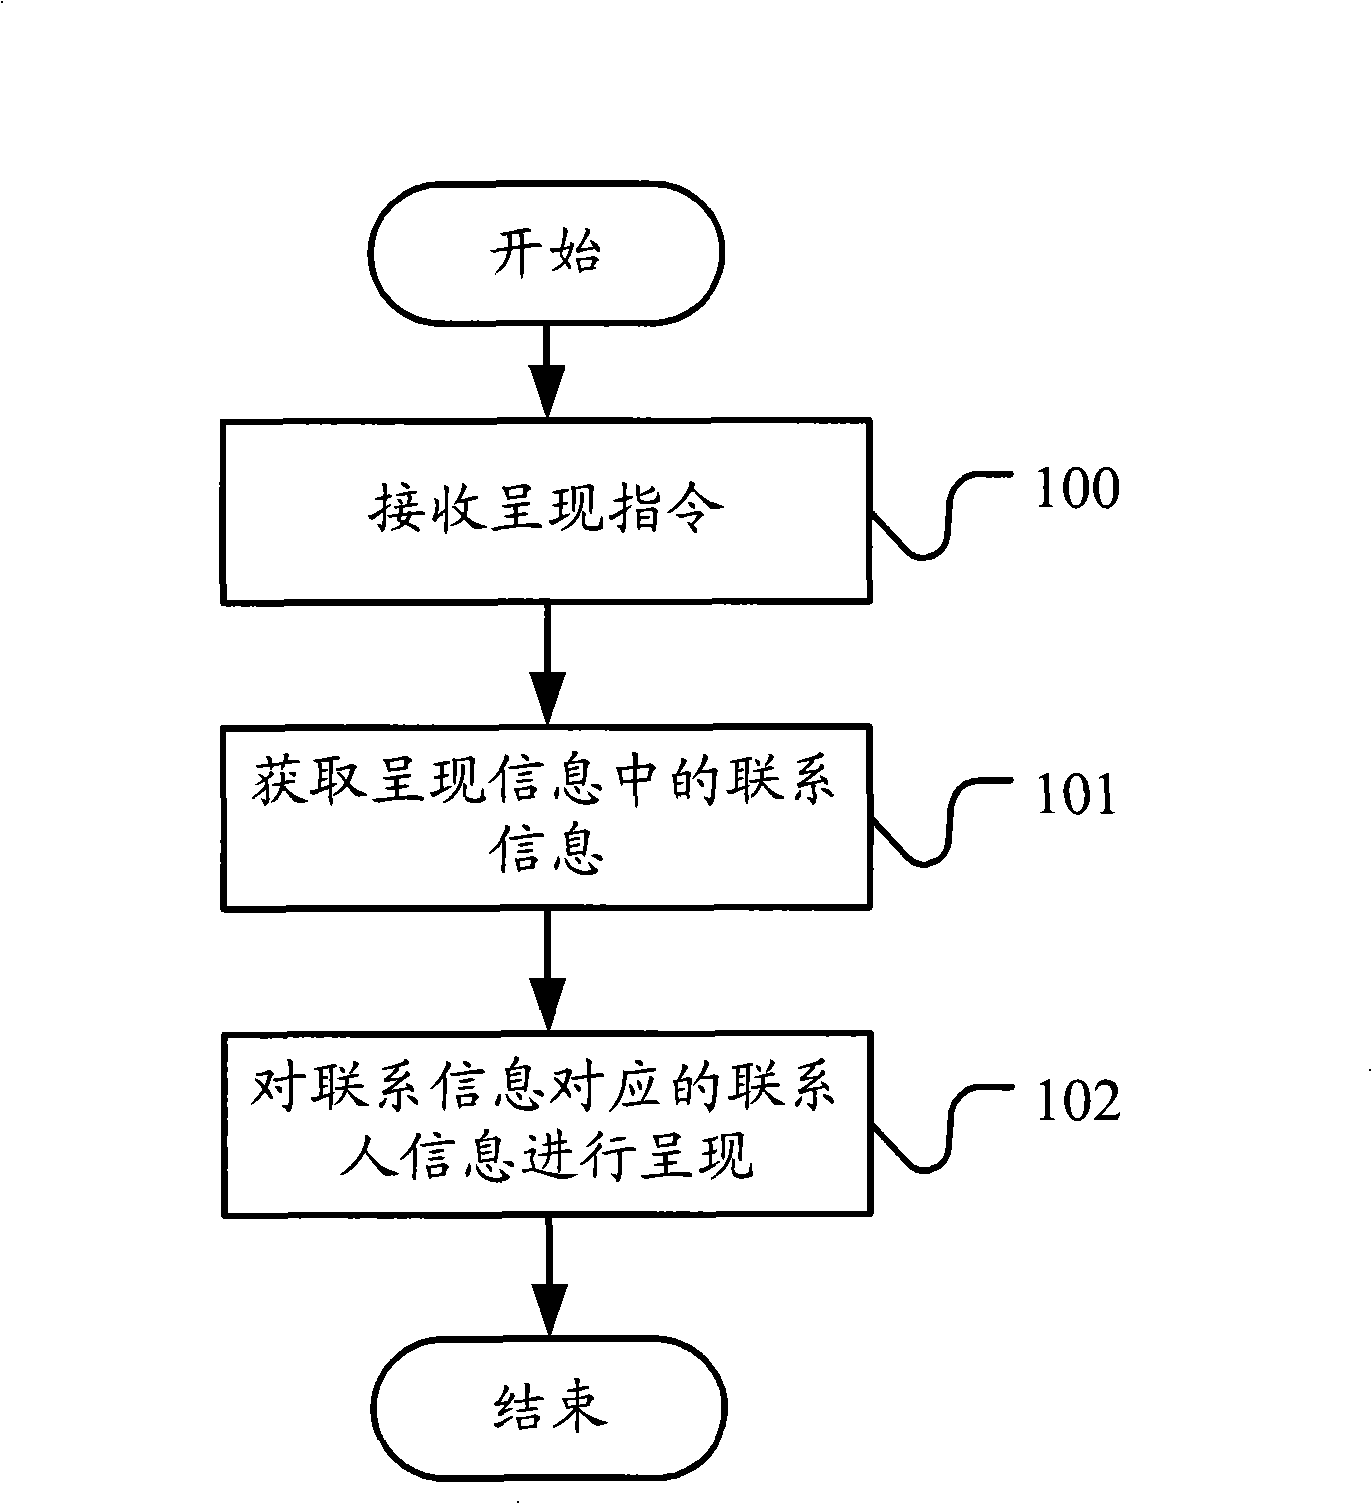 Method for showing information and communication terminal